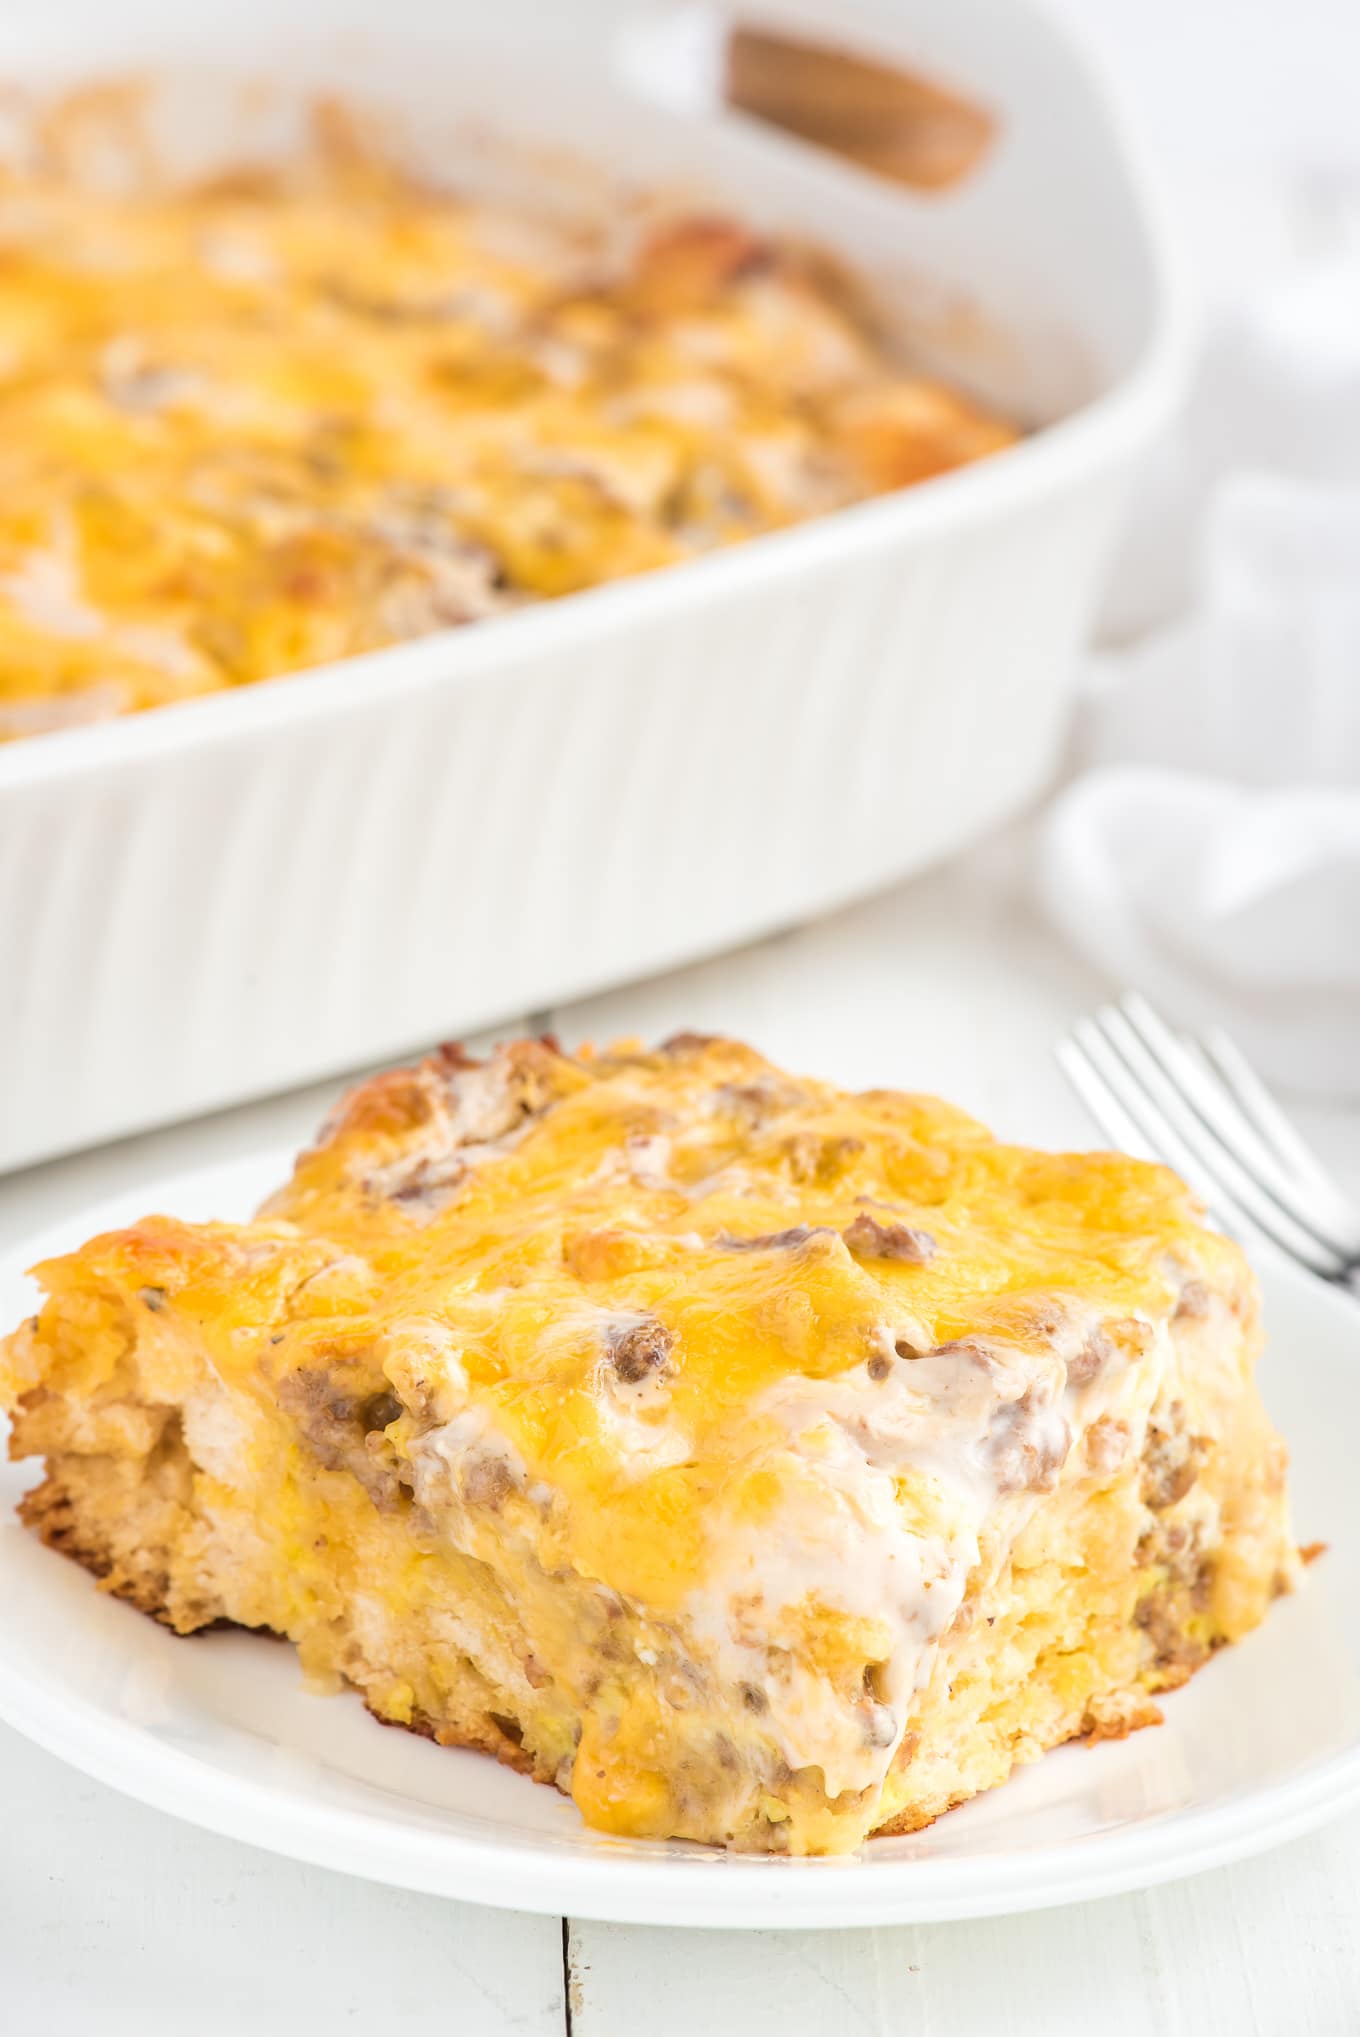 Breakfast casserole on a plate with a casserole dish in the background.